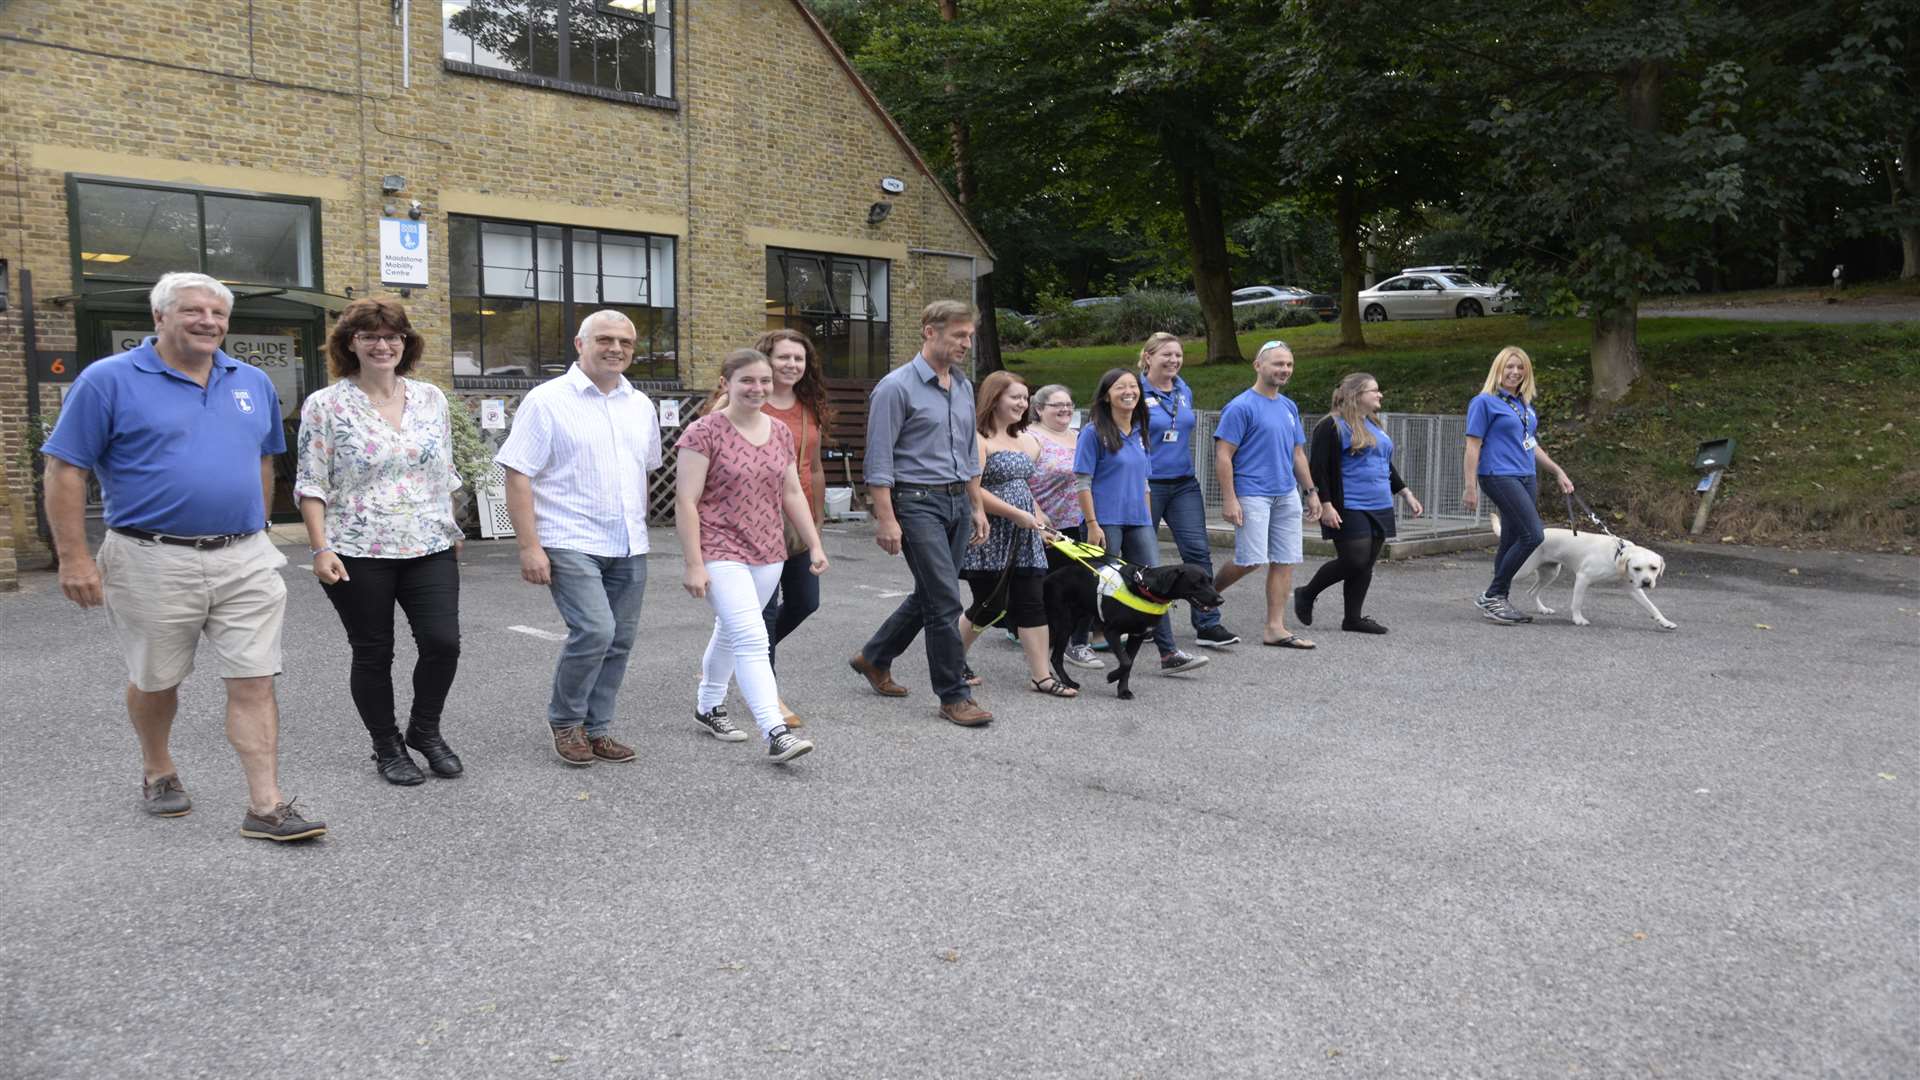 Staff and volunteers will be doing a sponsored walk for Guide Dogs